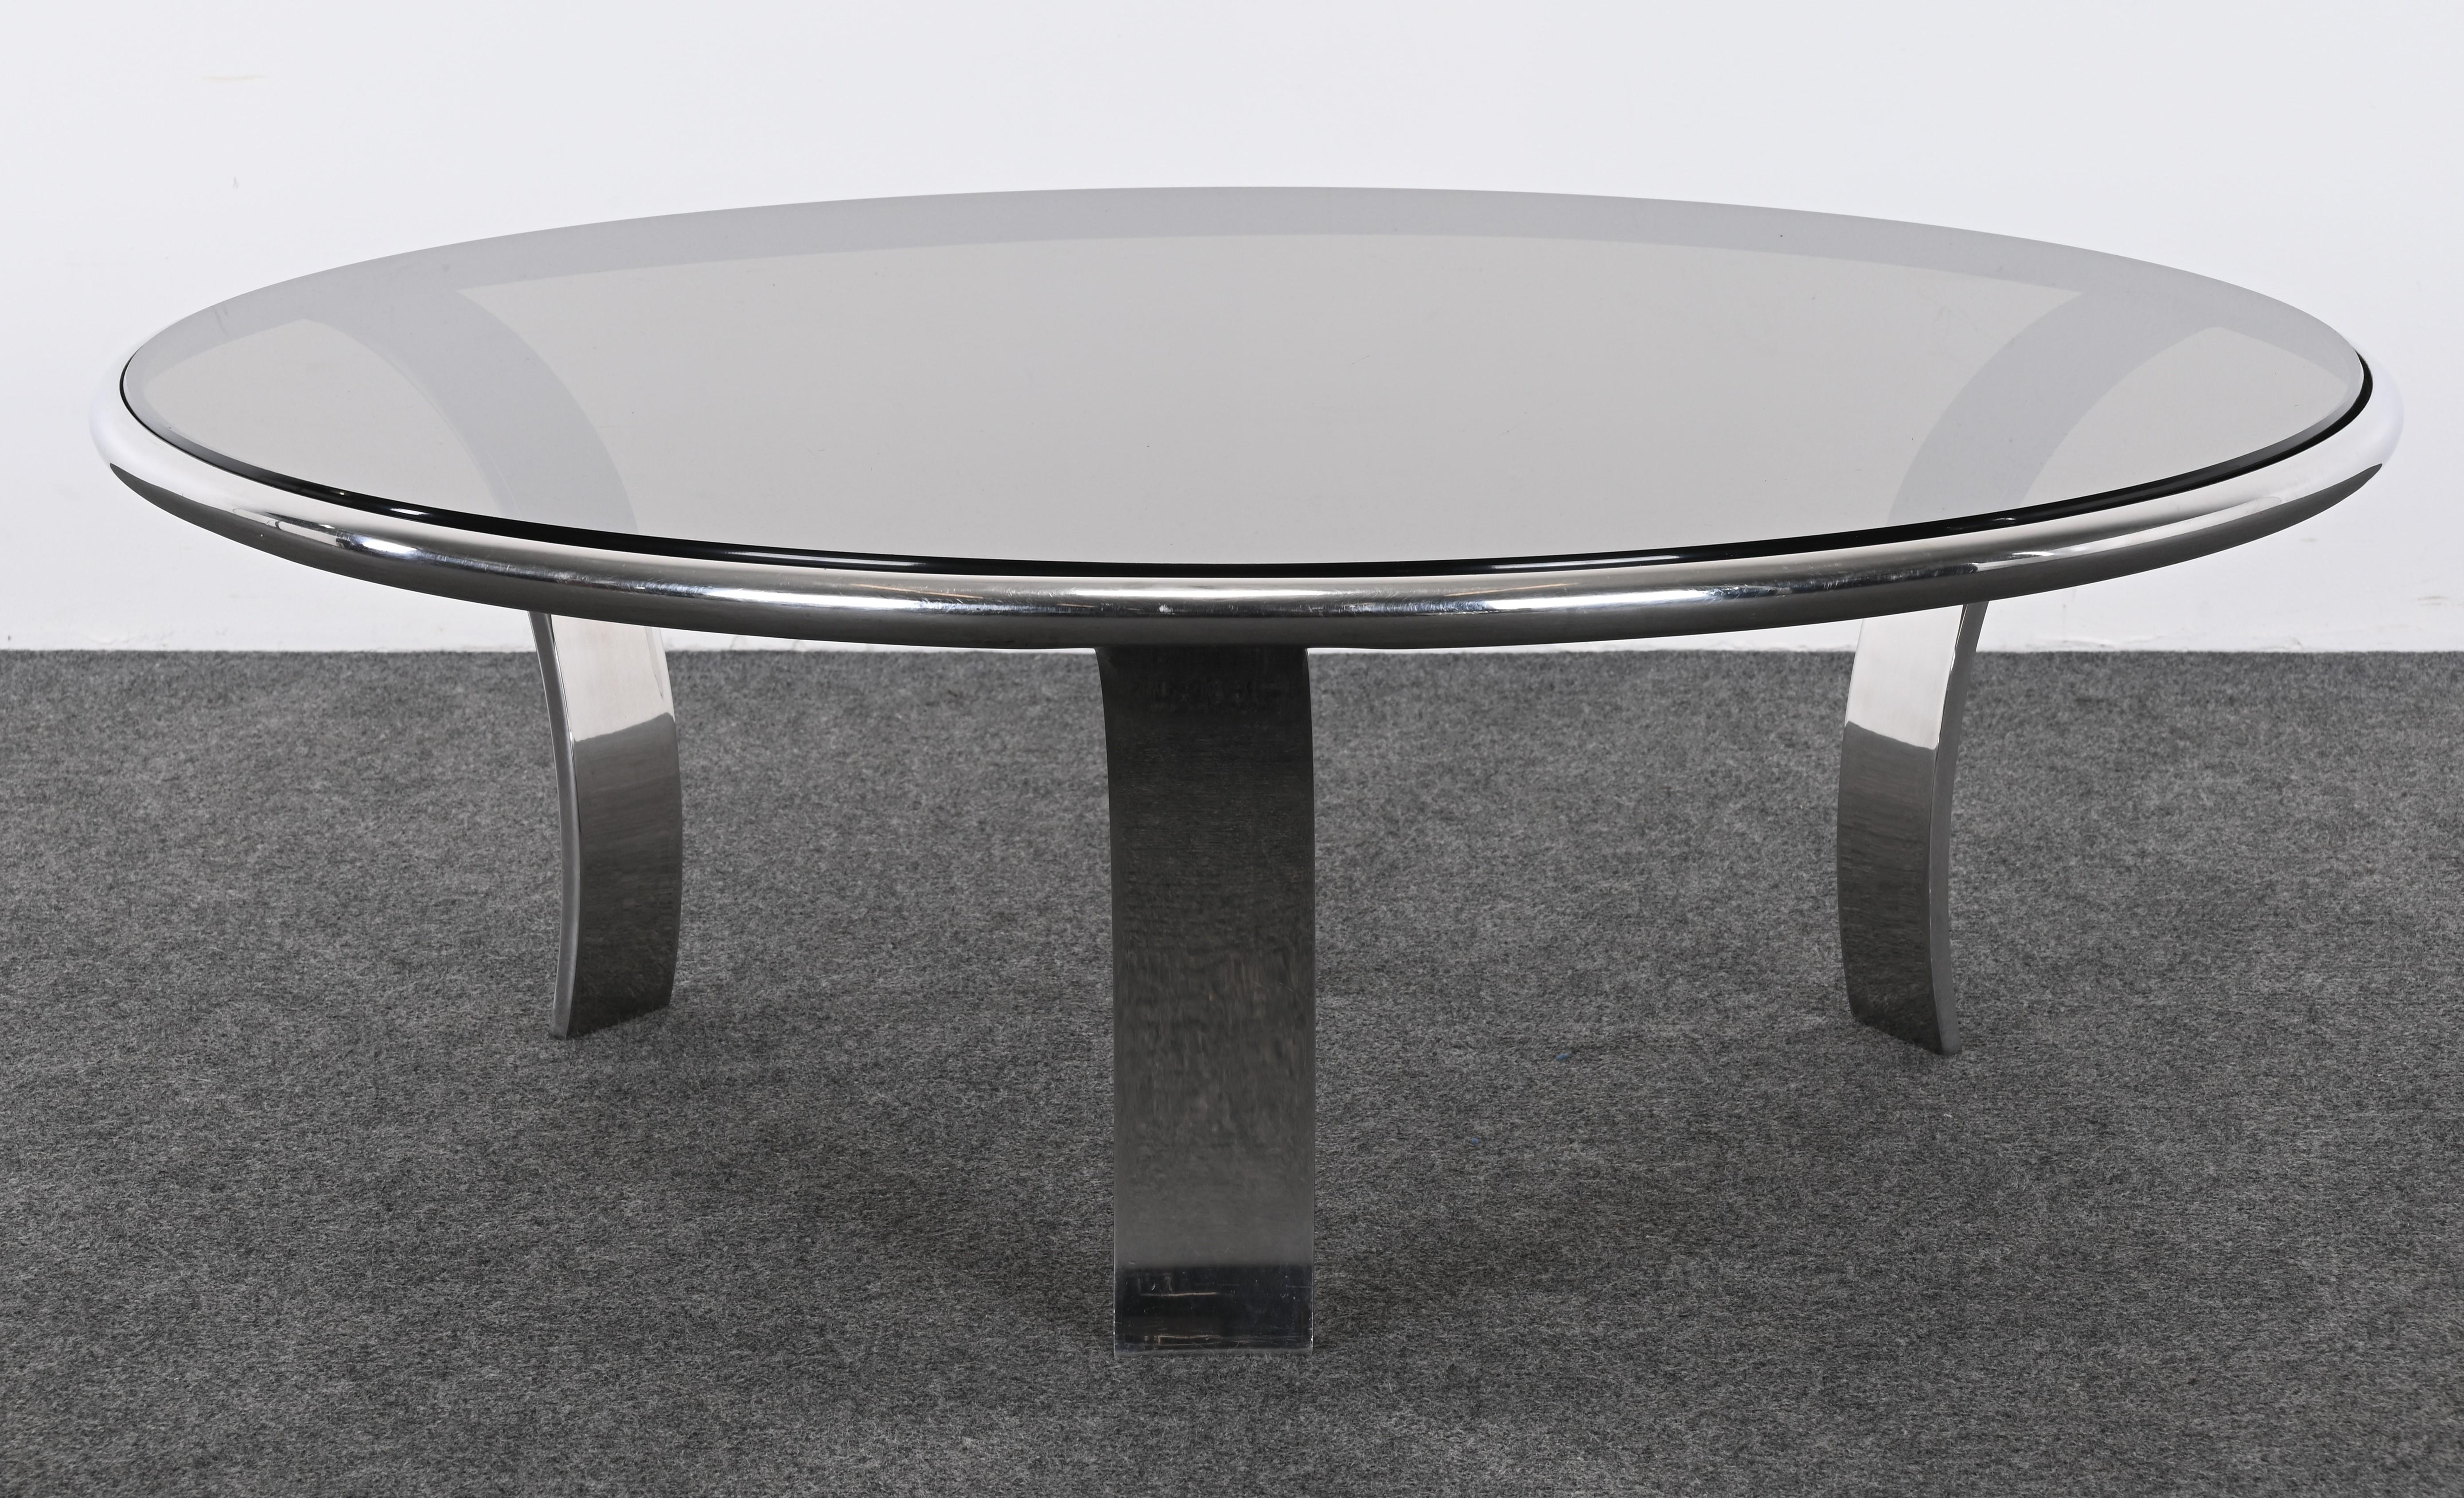 A Mid-Century Modern stainless steel coffee table with a smoked glass top. This table would look great in any Contemporary or Modern home or apartment. Great Size and a great statement piece! The table is structurally sound and in good condition